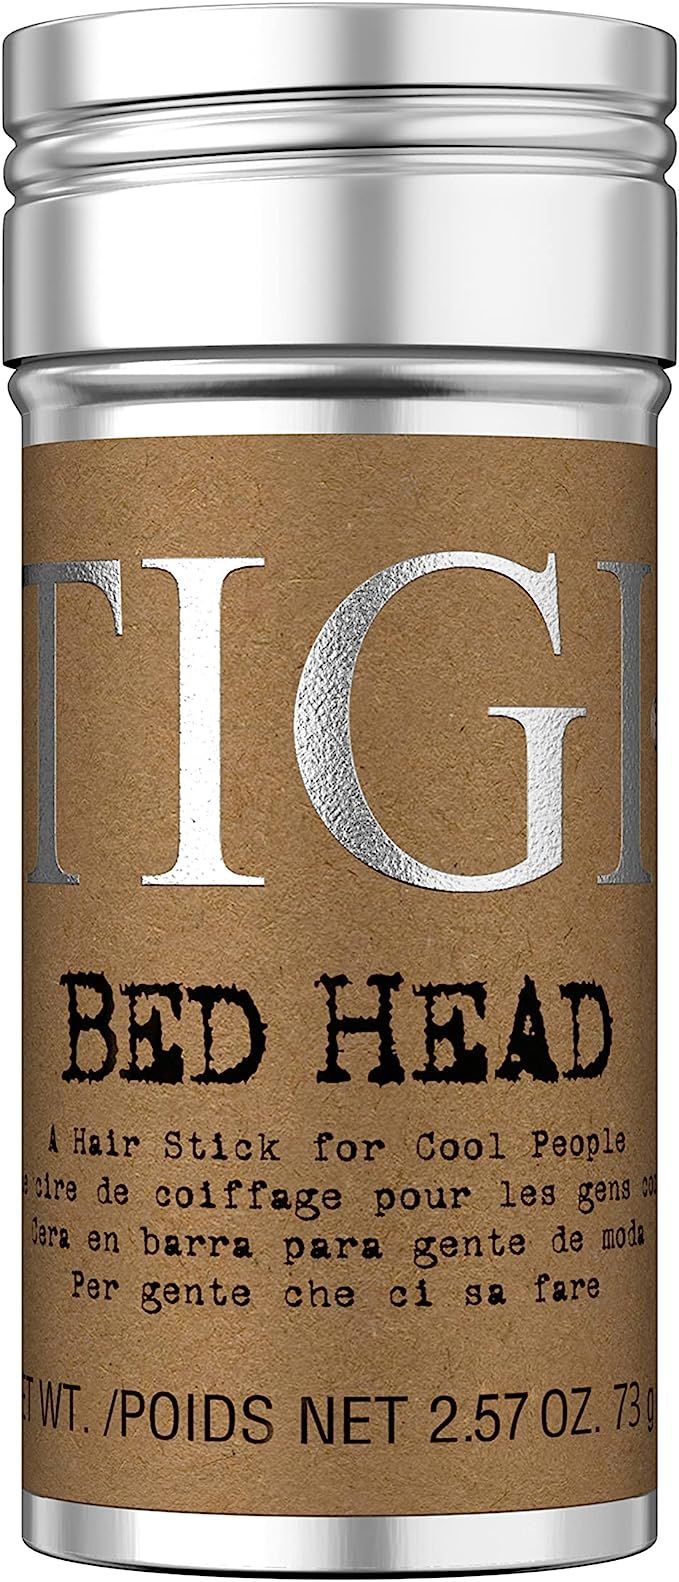 Bed Head for Men by Tigi Mens Hair Wax Stick for Strong Hold 73 g | Amazon (UK)